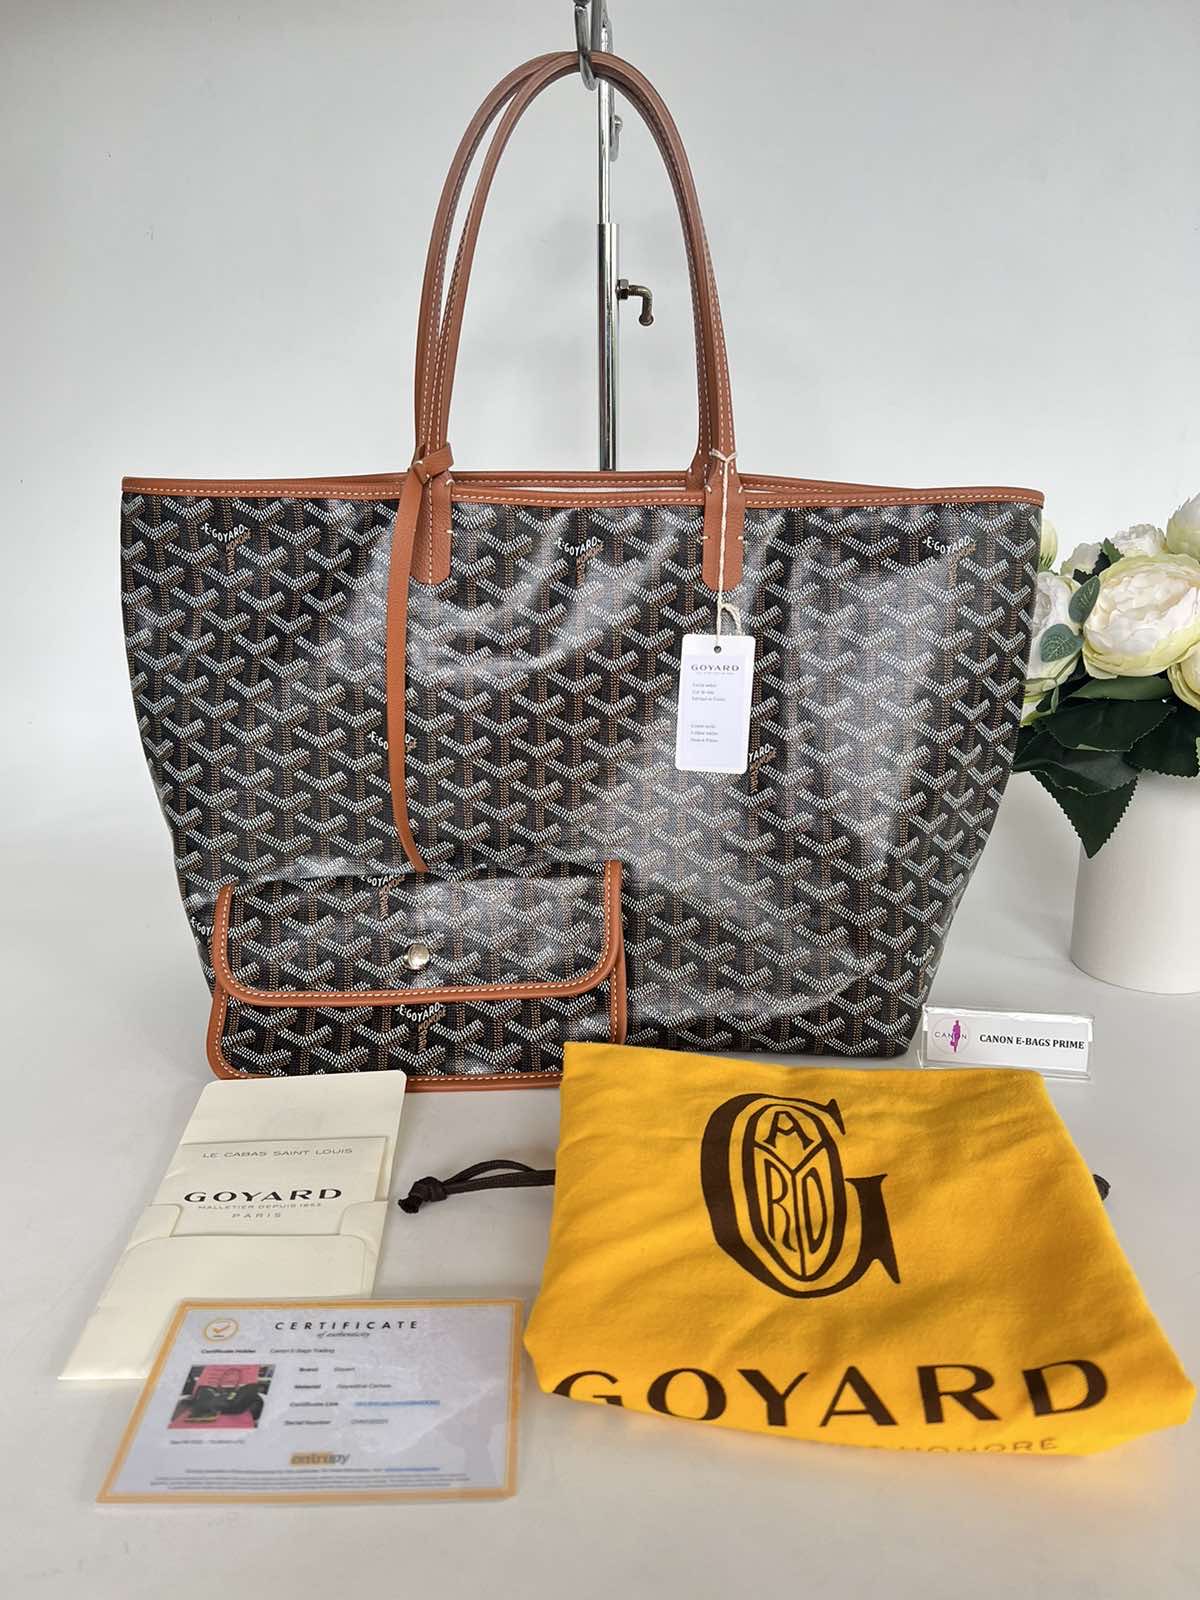 Goyard St. Louis Blue PM. Made in France. With tag, pouch, care cards,  dustbag & certificate of authenticity from ENTRUPY ❤️ - Canon E-Bags Prime